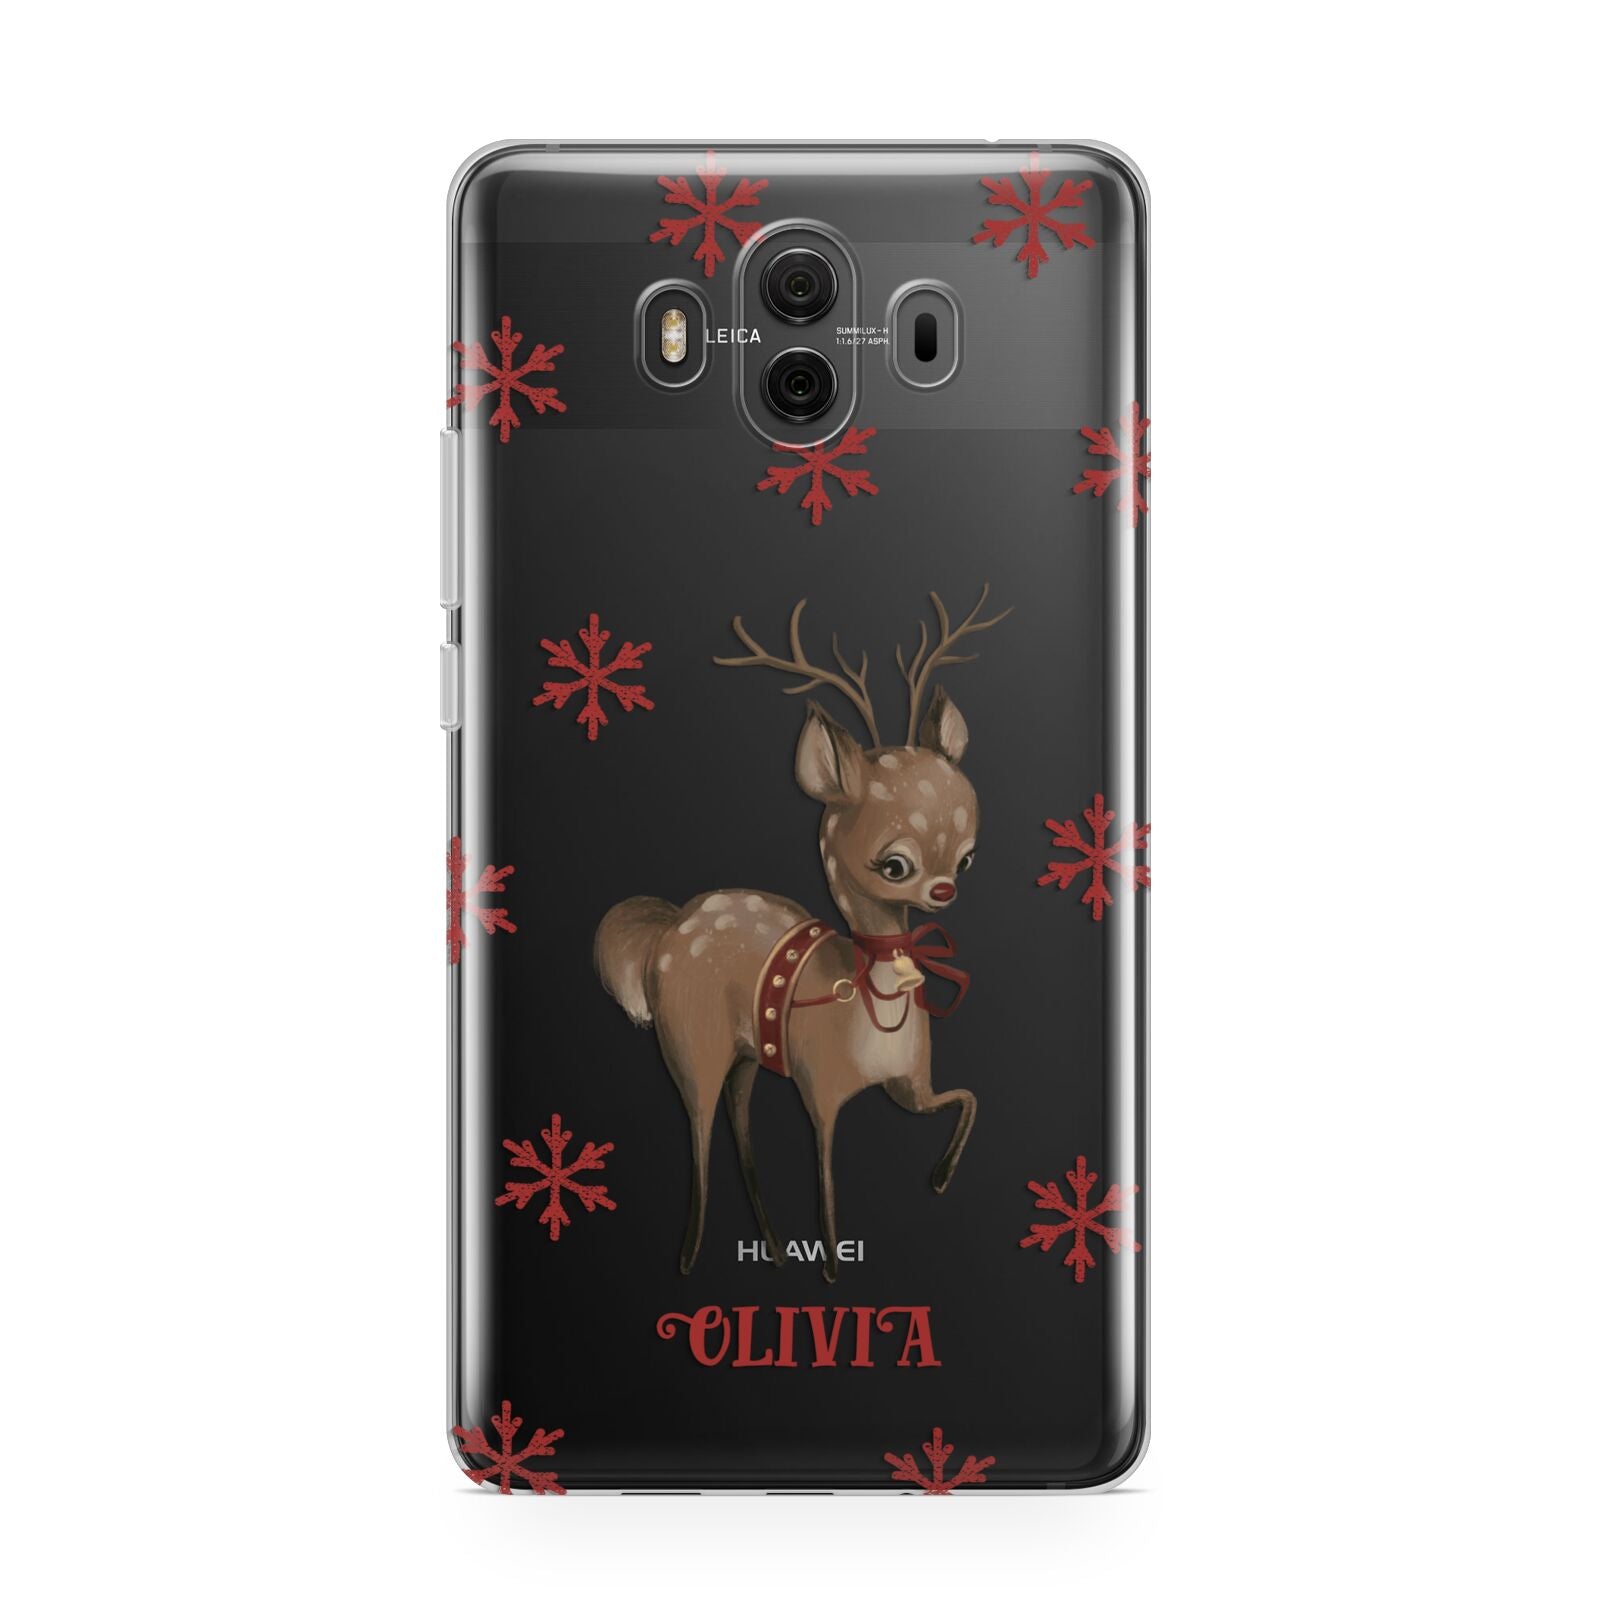 Rudolph Delivery Huawei Mate 10 Protective Phone Case